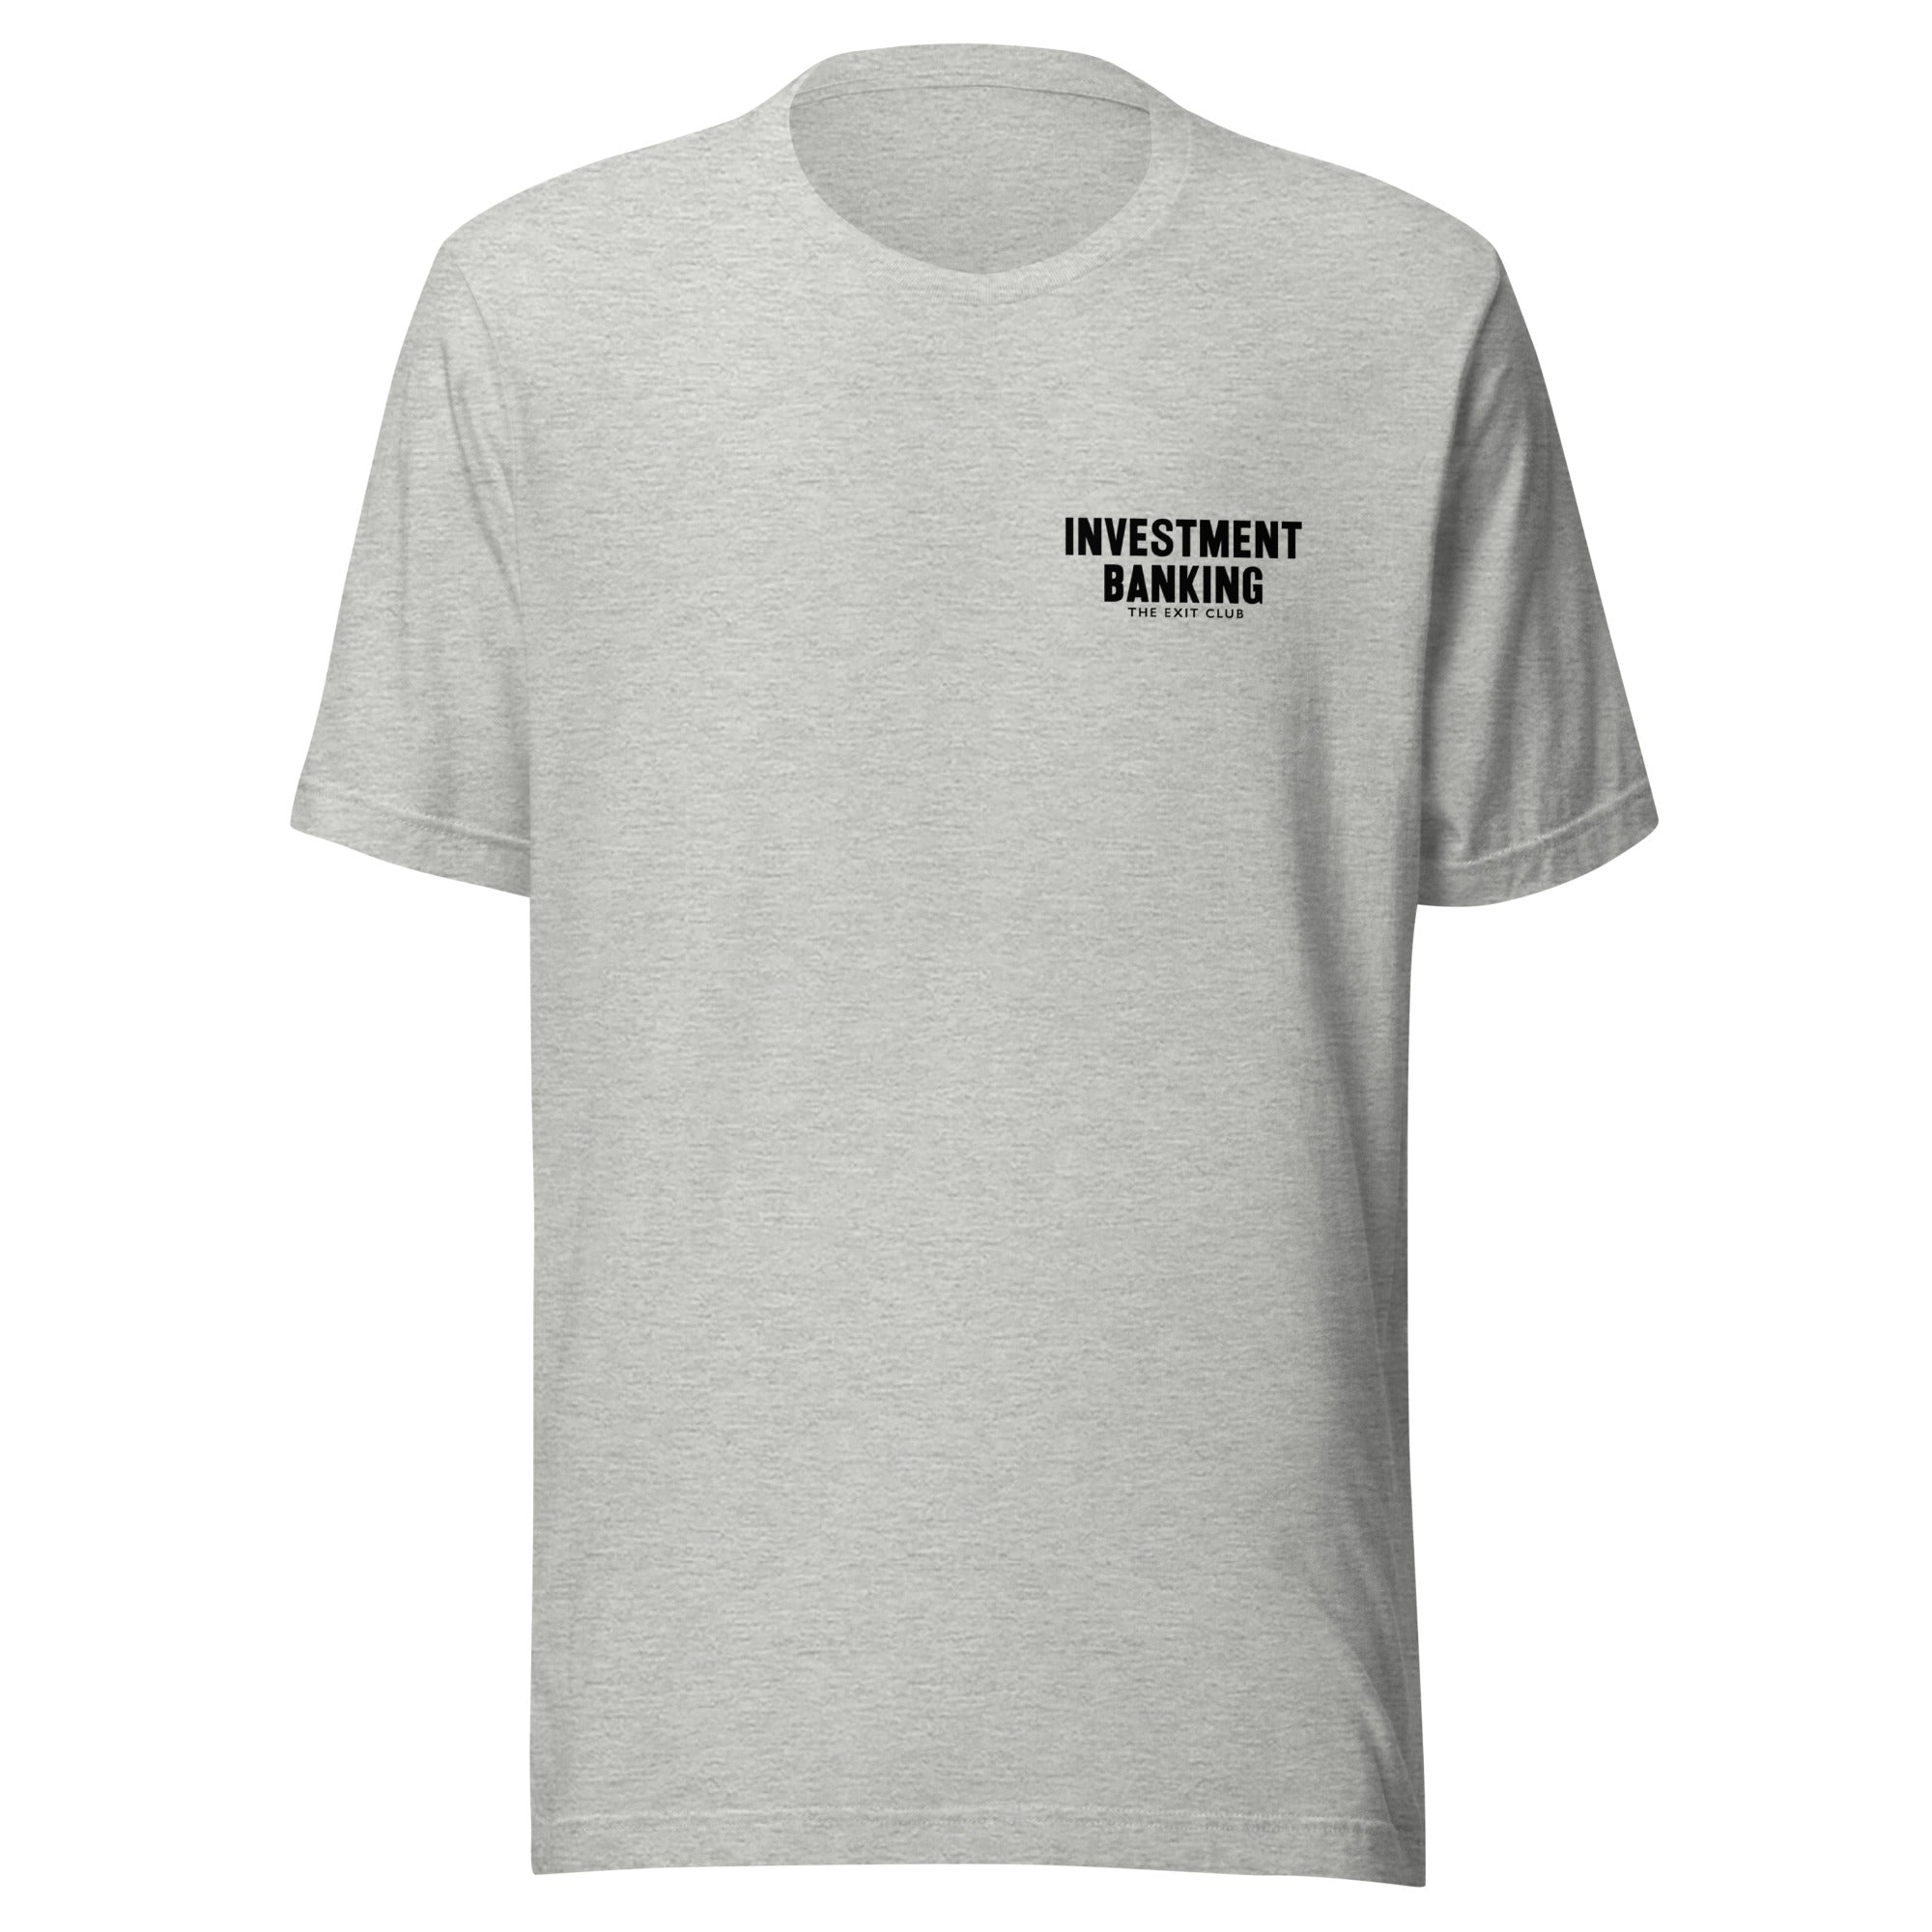 INVESTMENT BANKING T-SHIRT